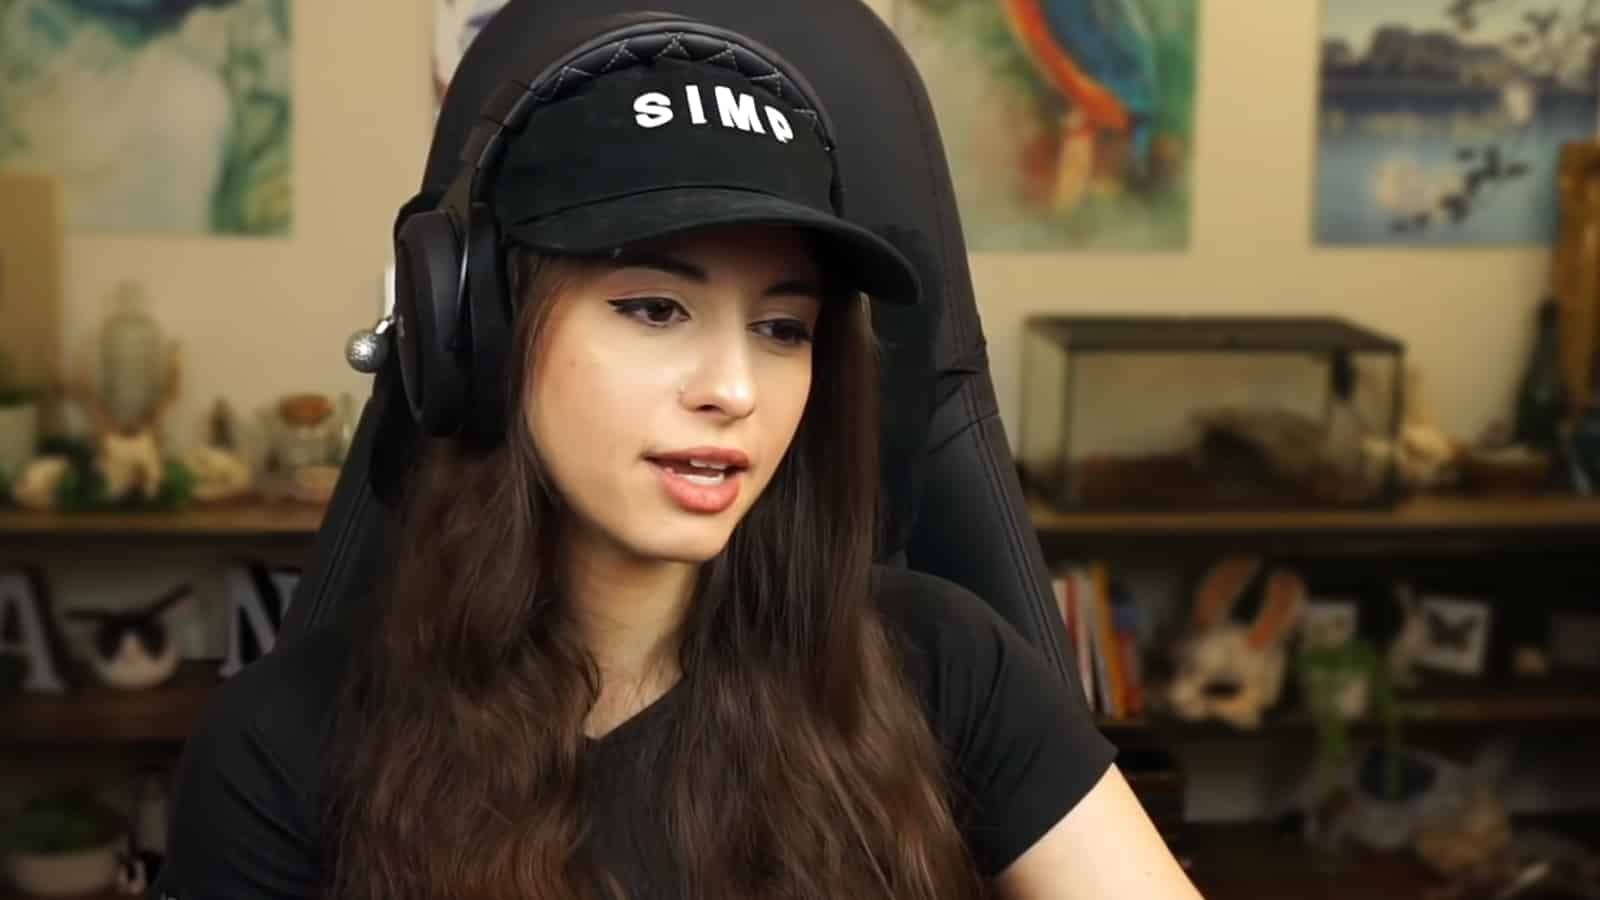 Sweet Anita sitting in her Twitch streaming setup dealing with creepy fans.